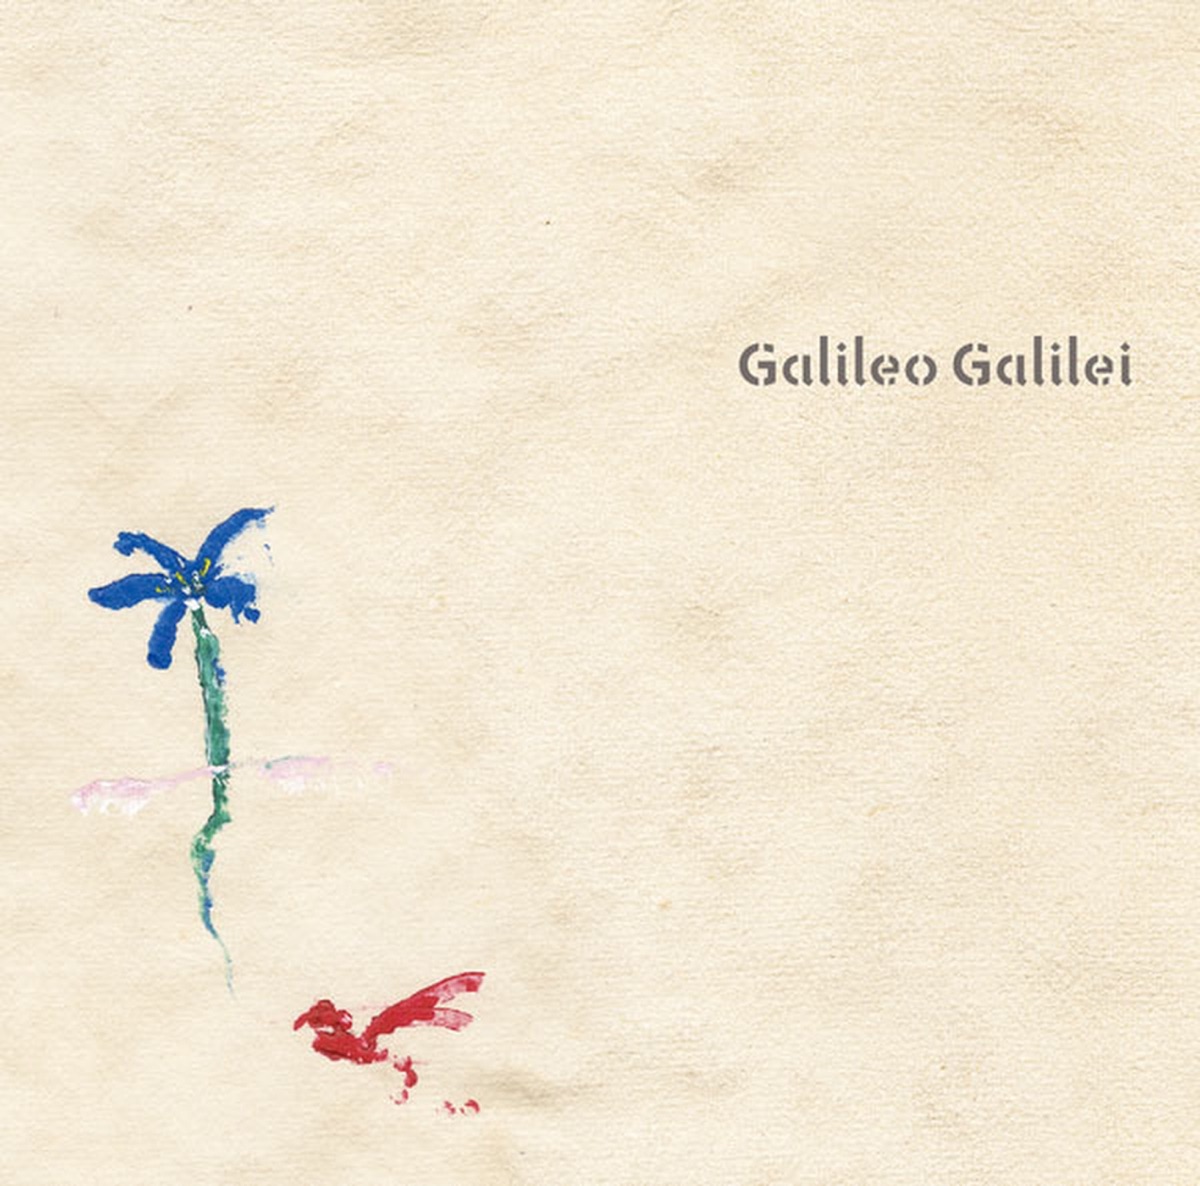 Cover art for『Galileo Galilei - 青い栞』from the release『Aoi Shiori